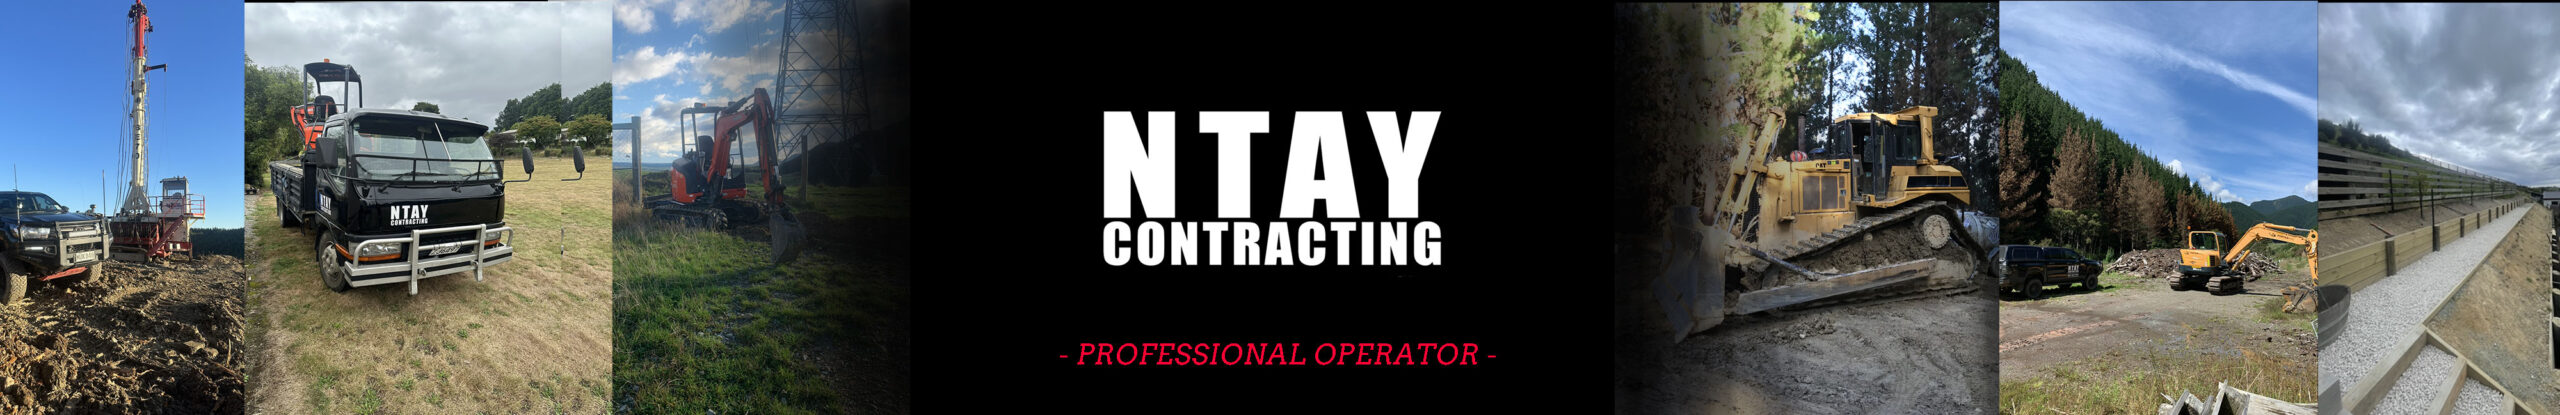 Ntay Contracting